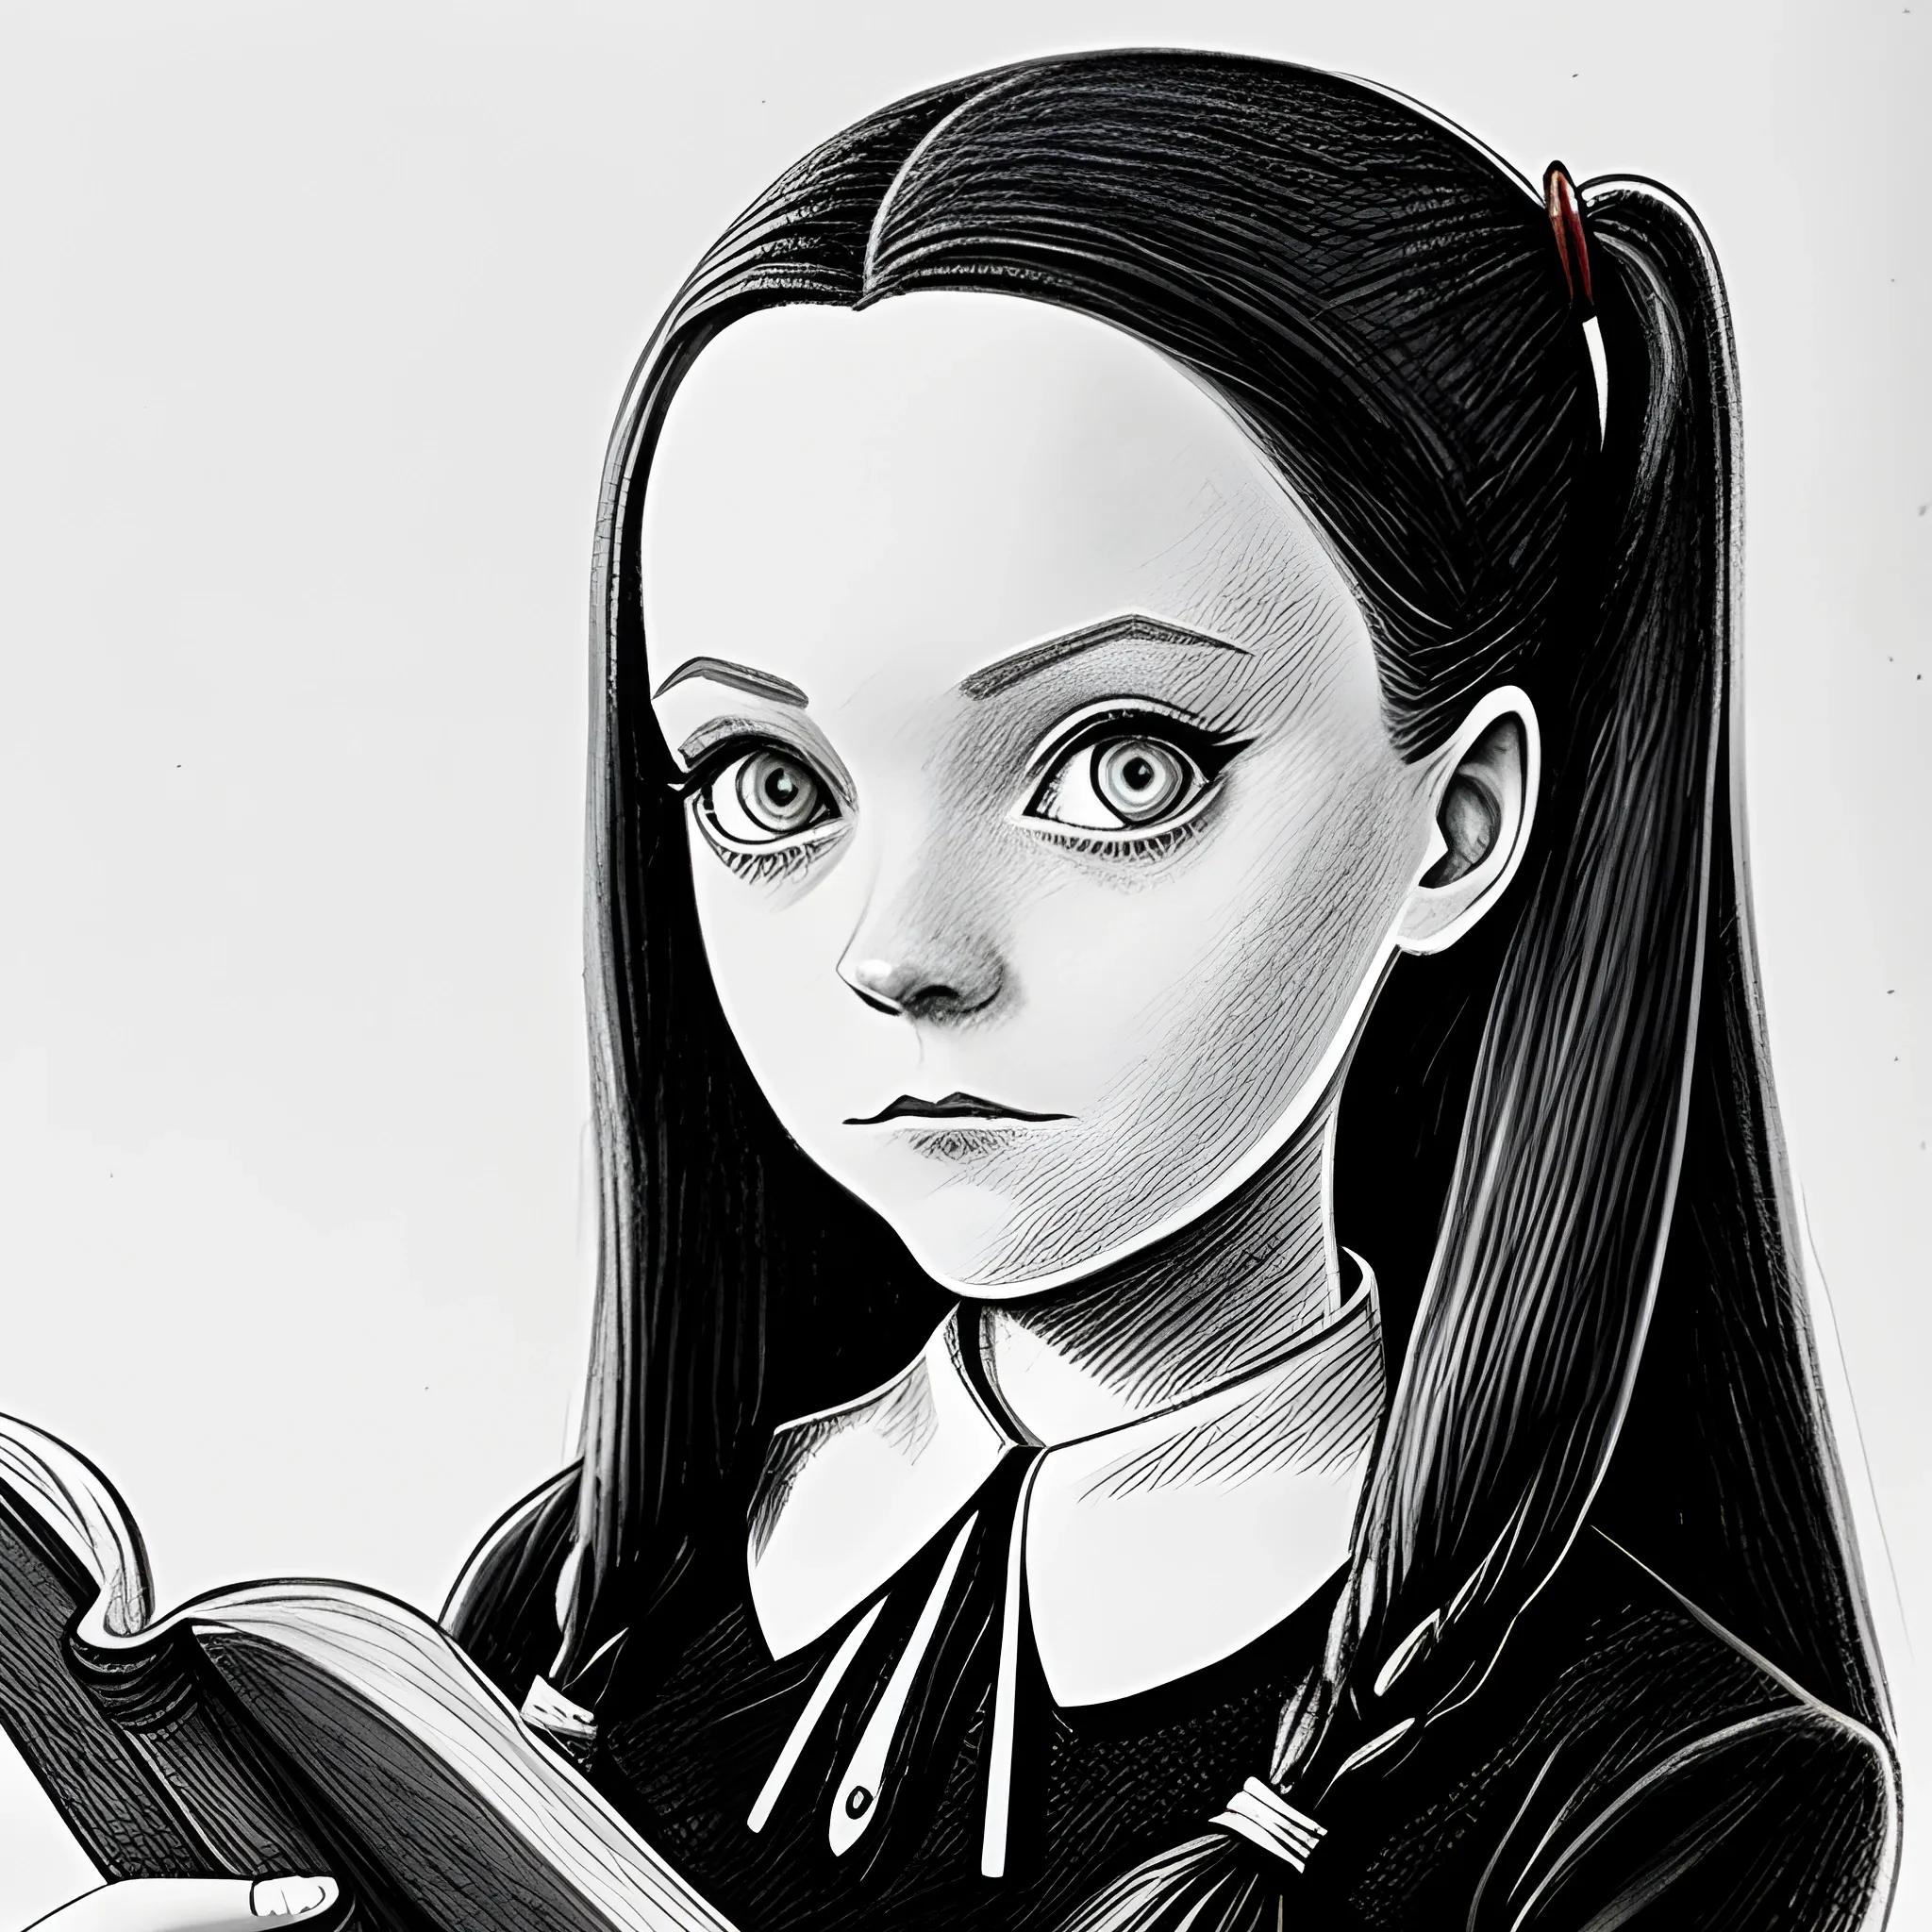 pencil sketch of Wednesday Addams reading a book